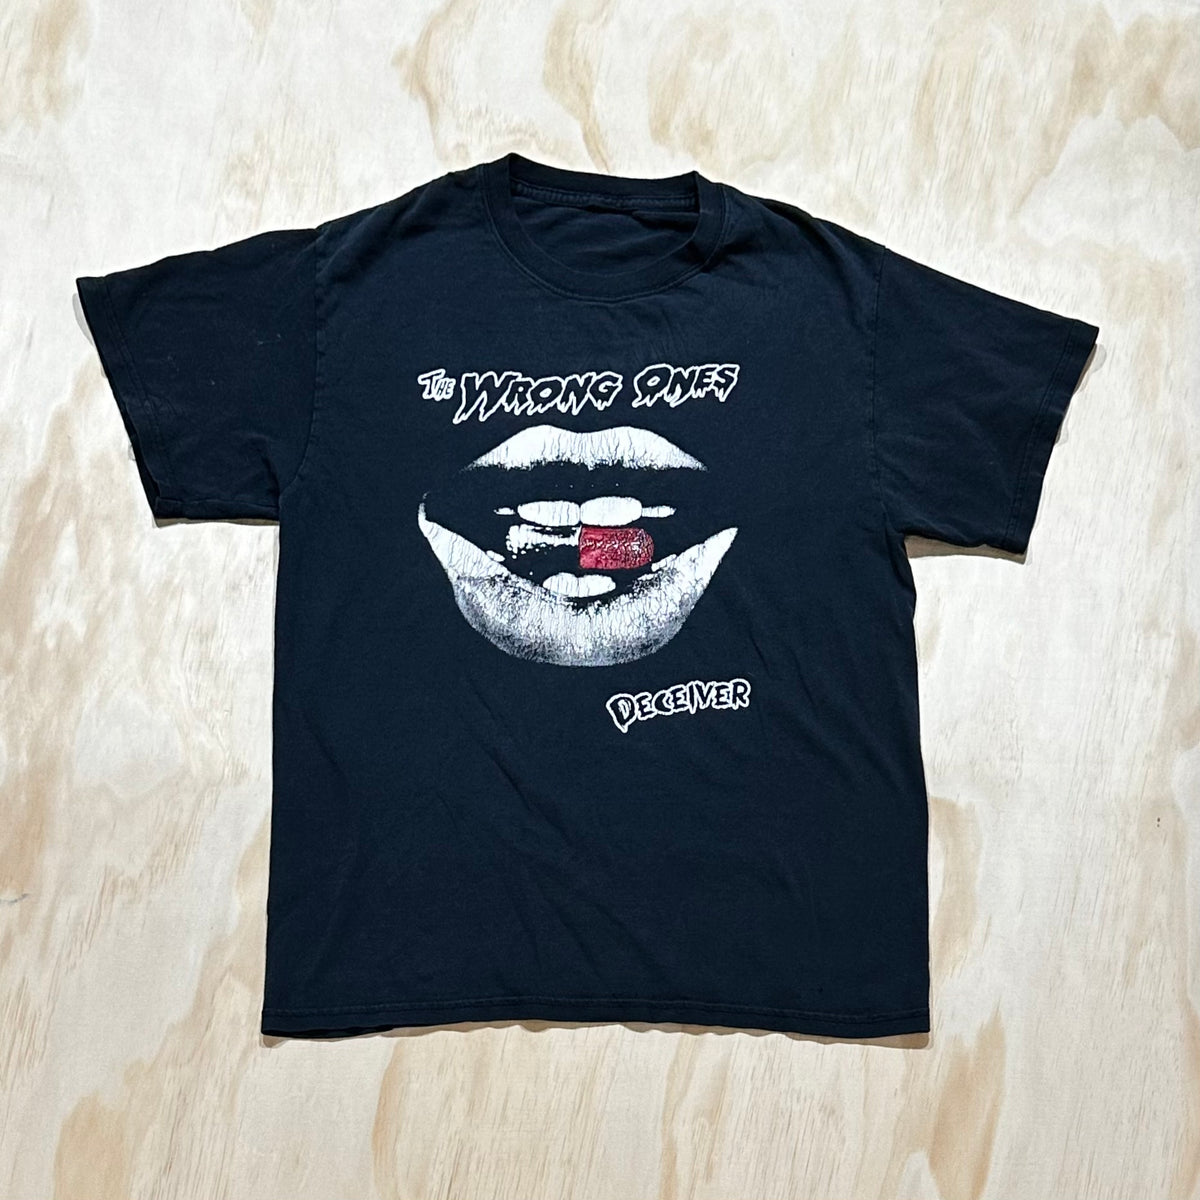 Vintage The Wrong Ones Deceiver t-shirt